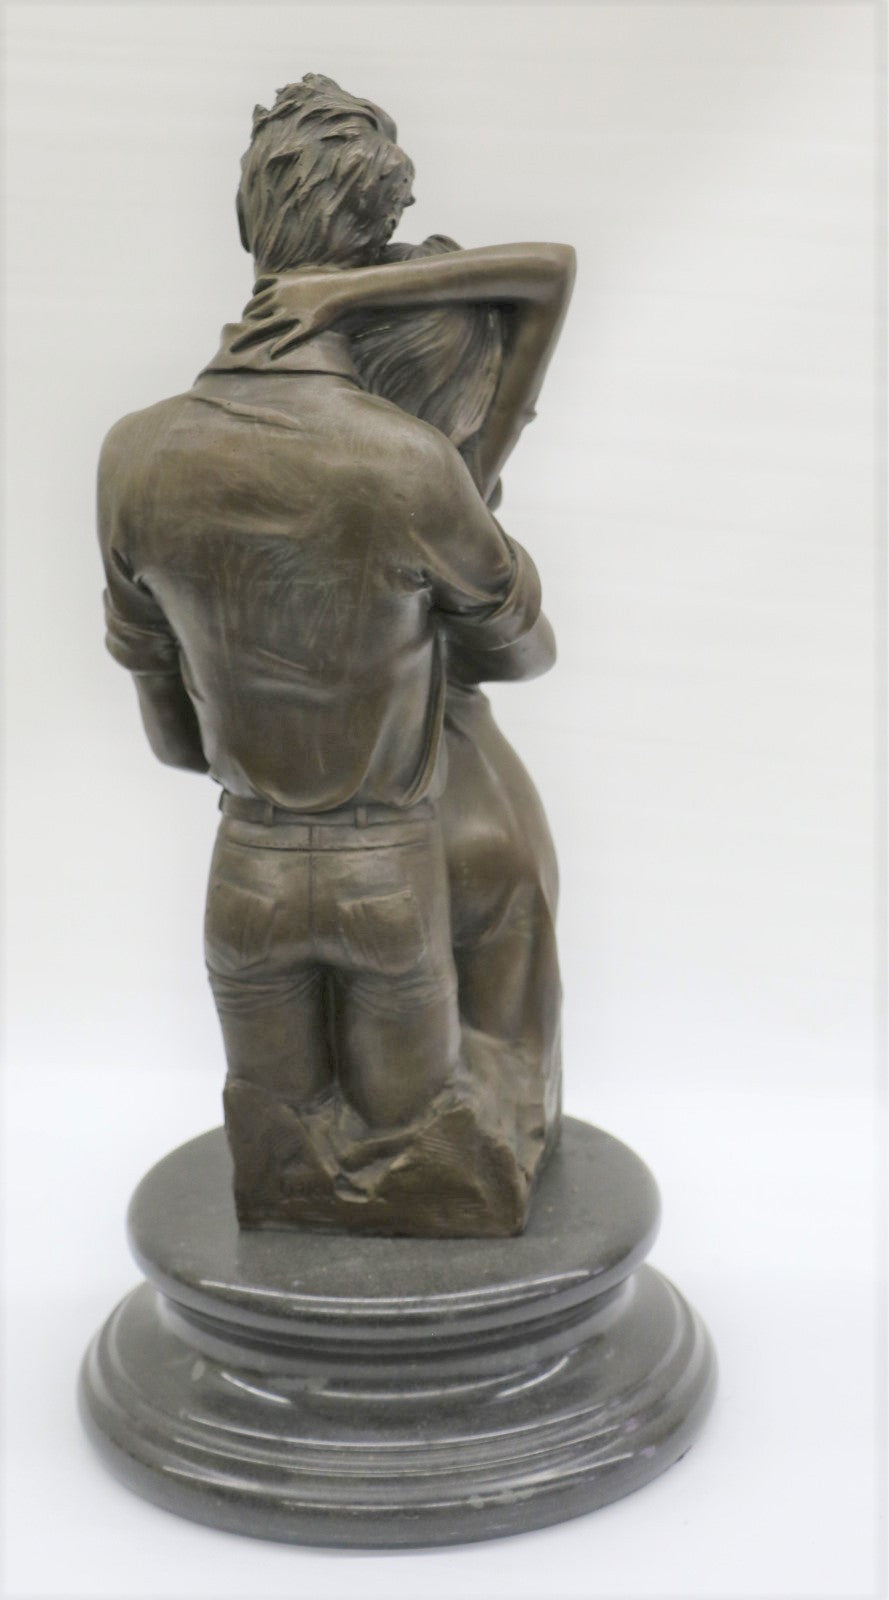 Bronze sculpture of a couple's tender embrace portrays the power of intimacy